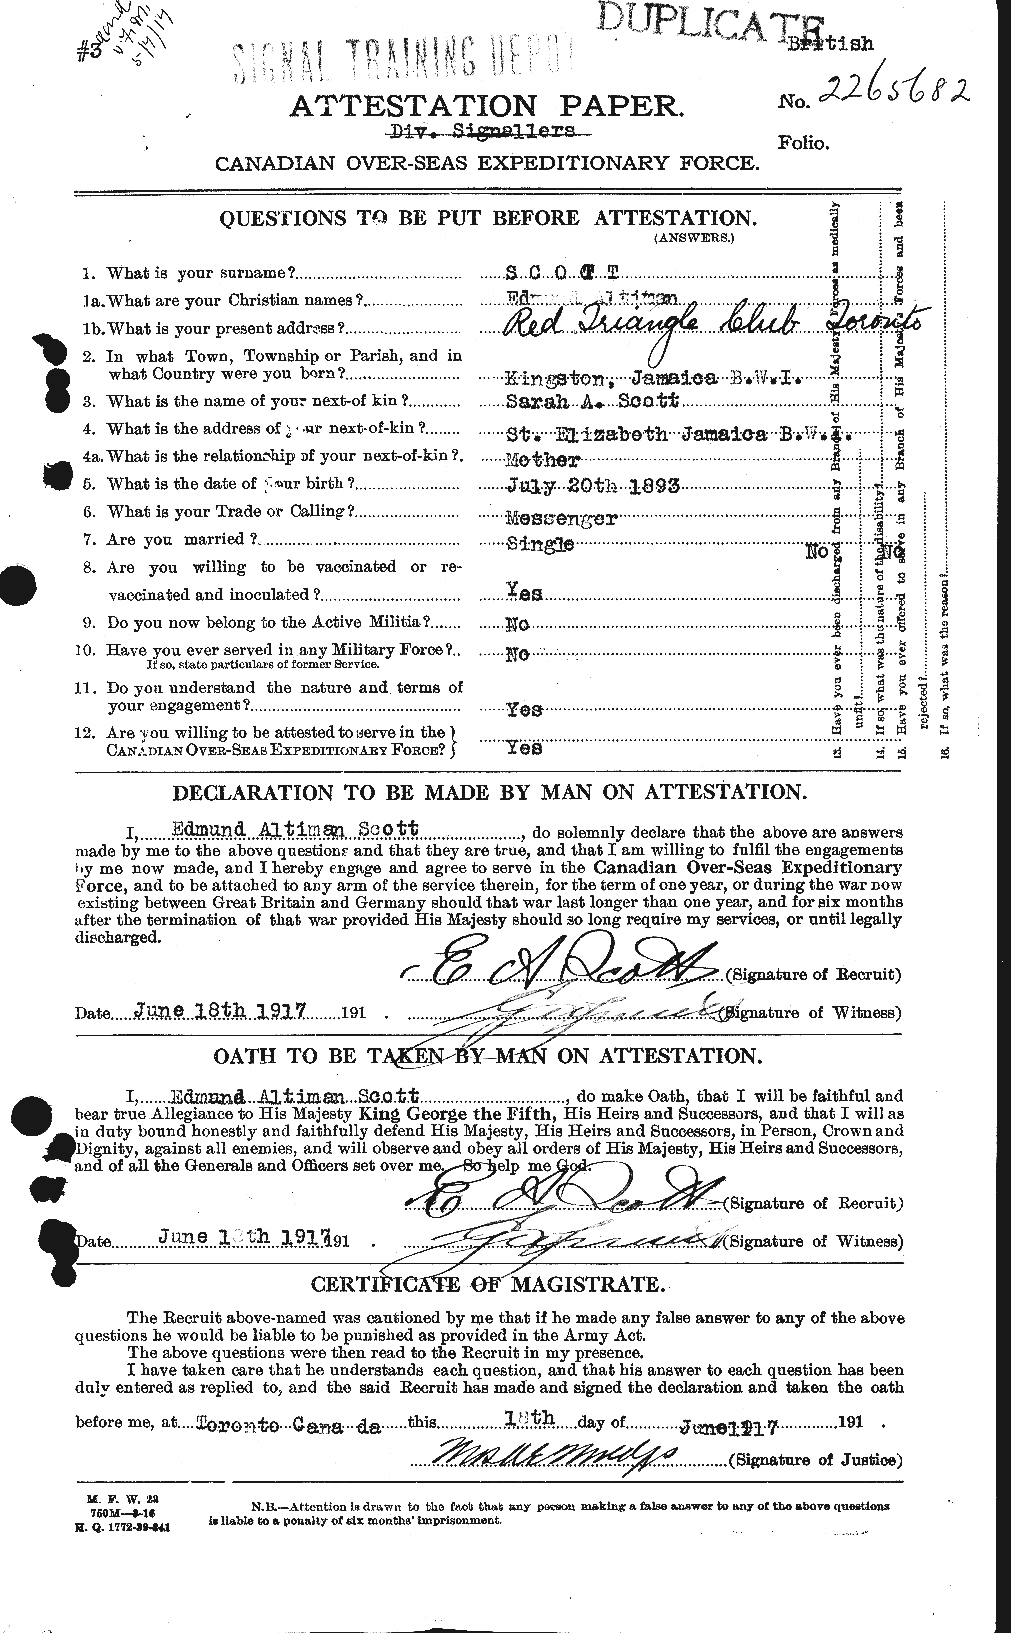 Personnel Records of the First World War - CEF 085332a